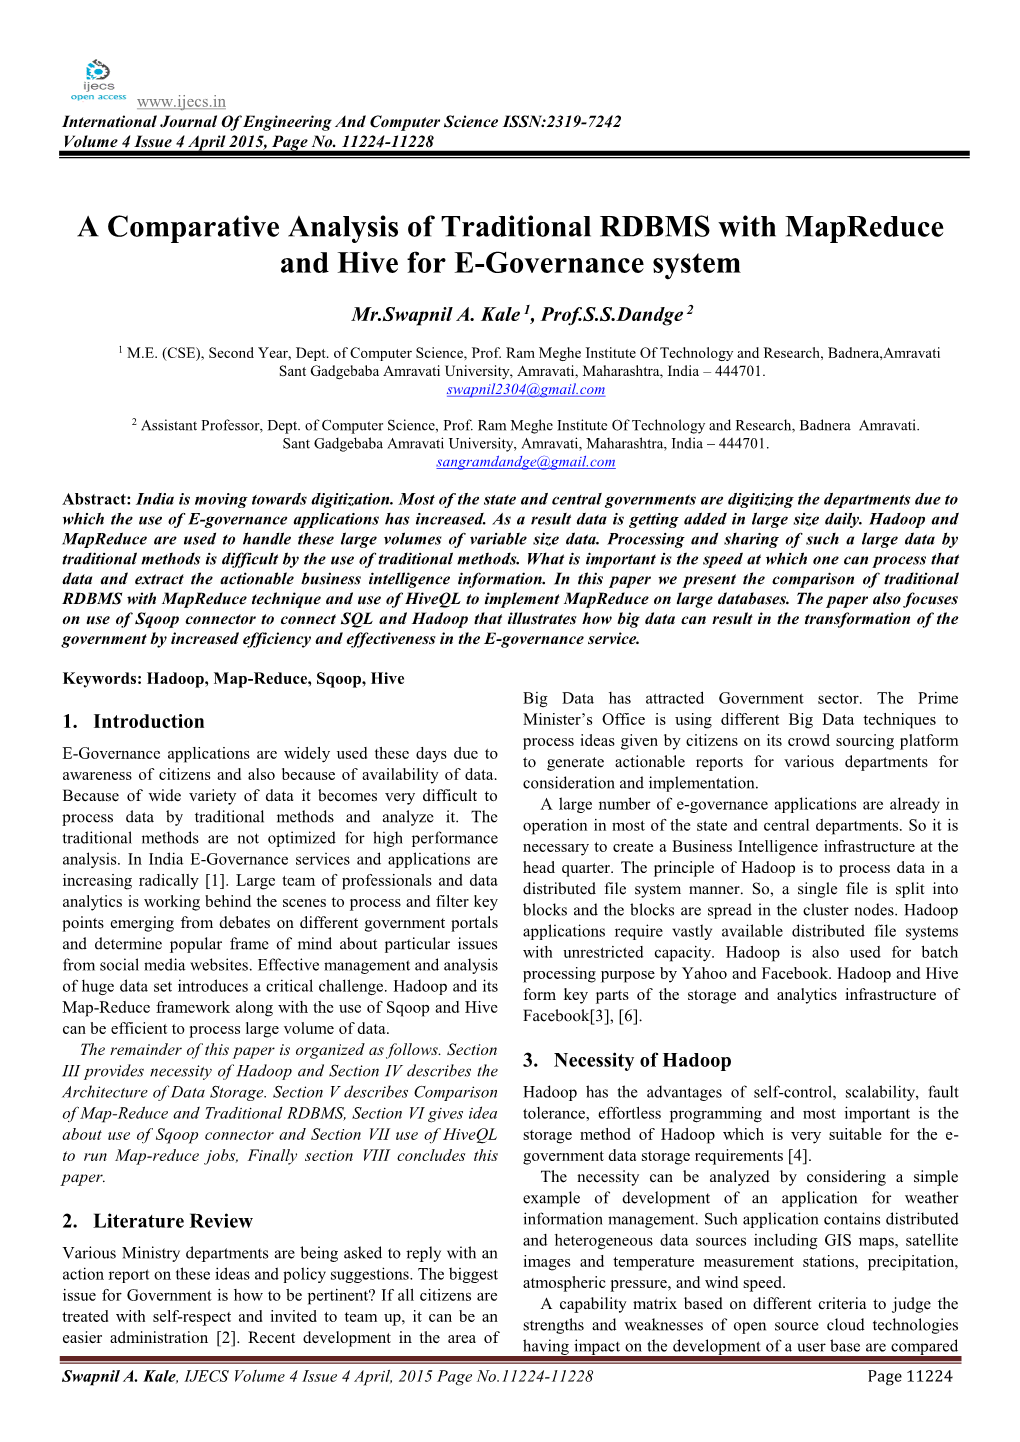 A Comparative Analysis of Traditional RDBMS with Mapreduce and Hive for E-Governance System